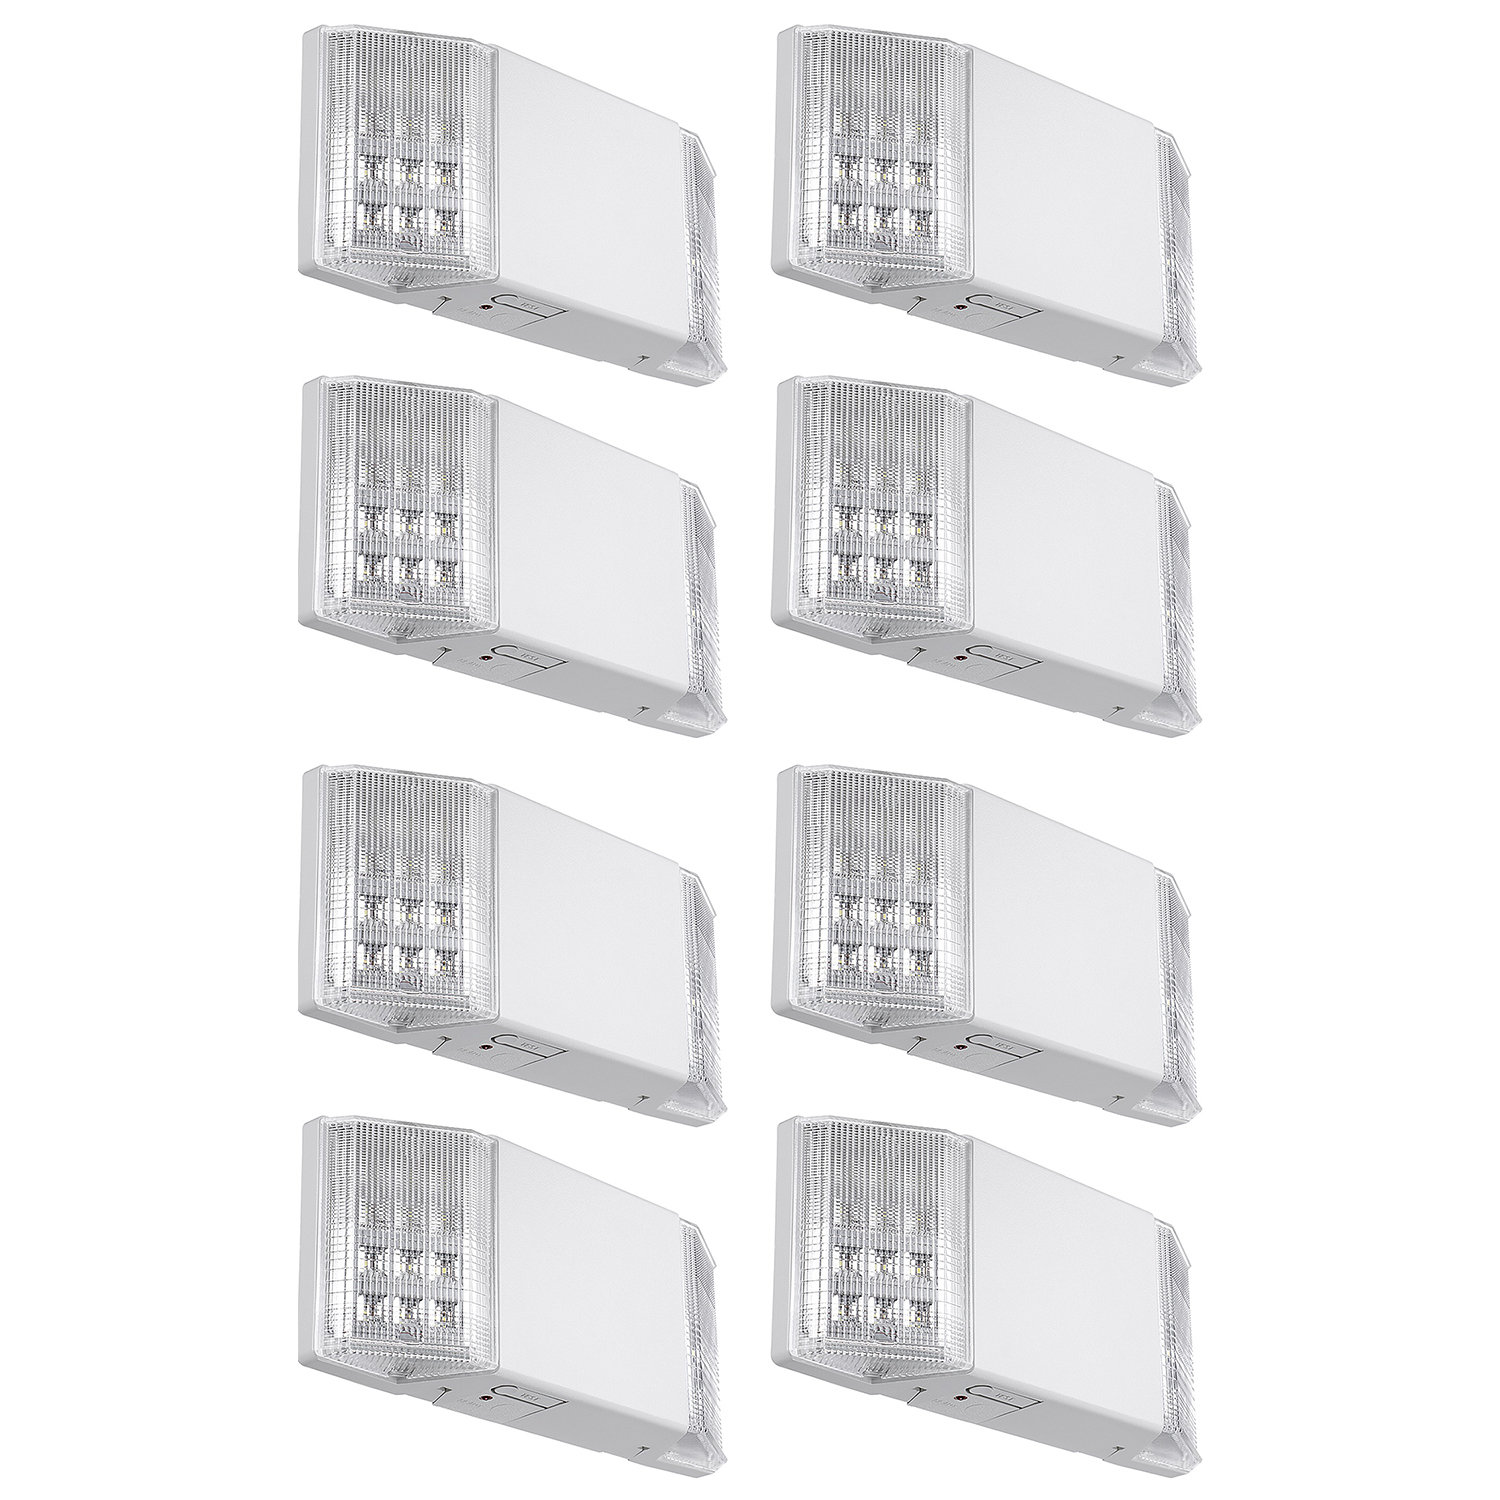 TORCHSTAR LED Emergency Lighting, Commercial Emergency Lights with Battery  Backup, UL Listed, Two He…See more TORCHSTAR LED Emergency Lighting